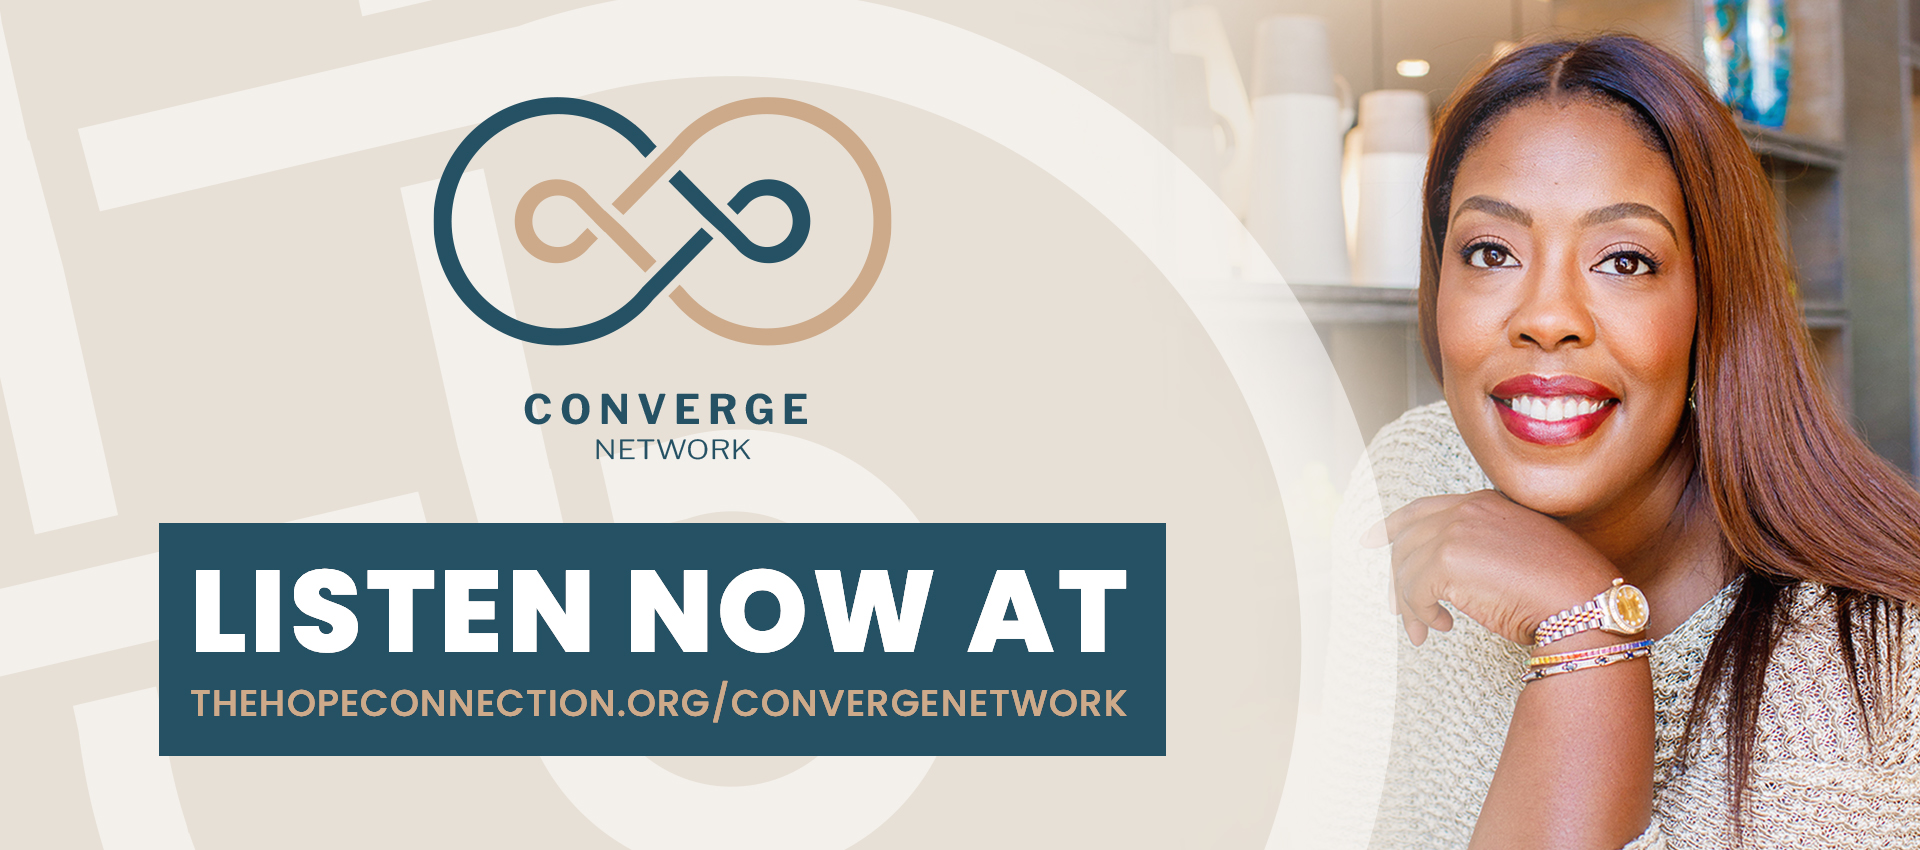 The Converge Network
 